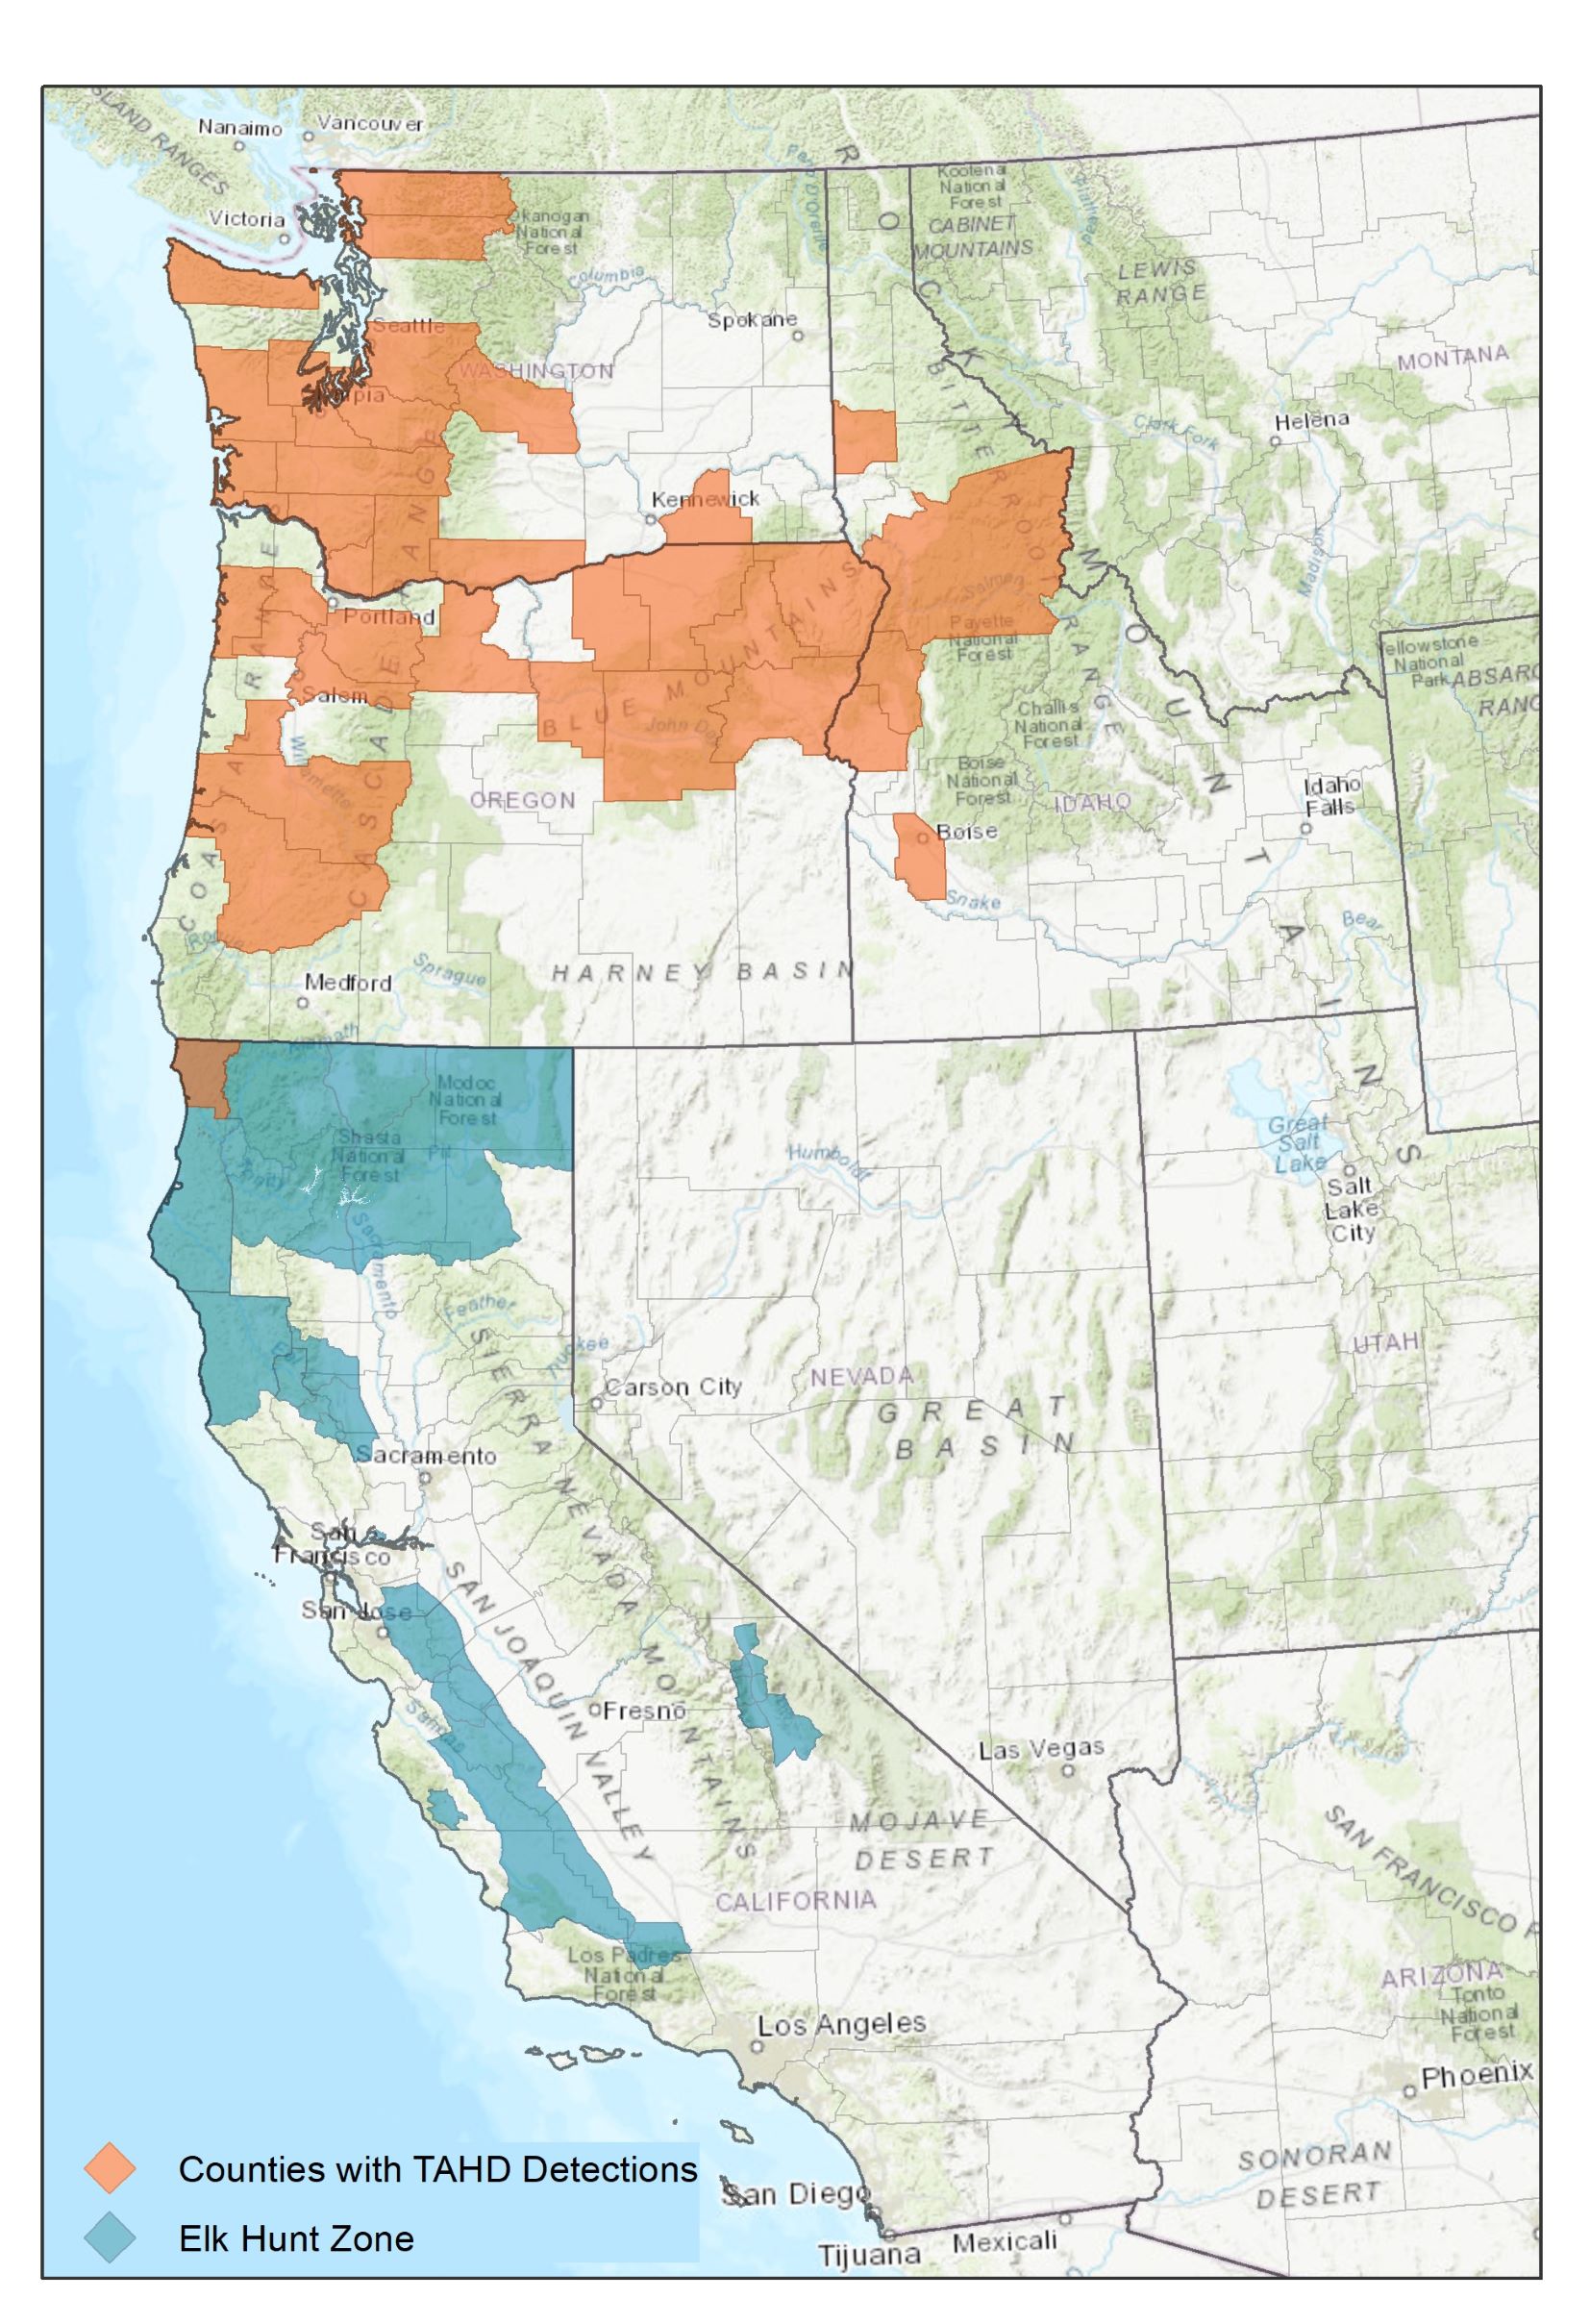 Map of counties (shown in orange) in Washington, Idaho, Oregon, and California where TAHD has been detected in elk. Distributions of elk in California are shown in blue